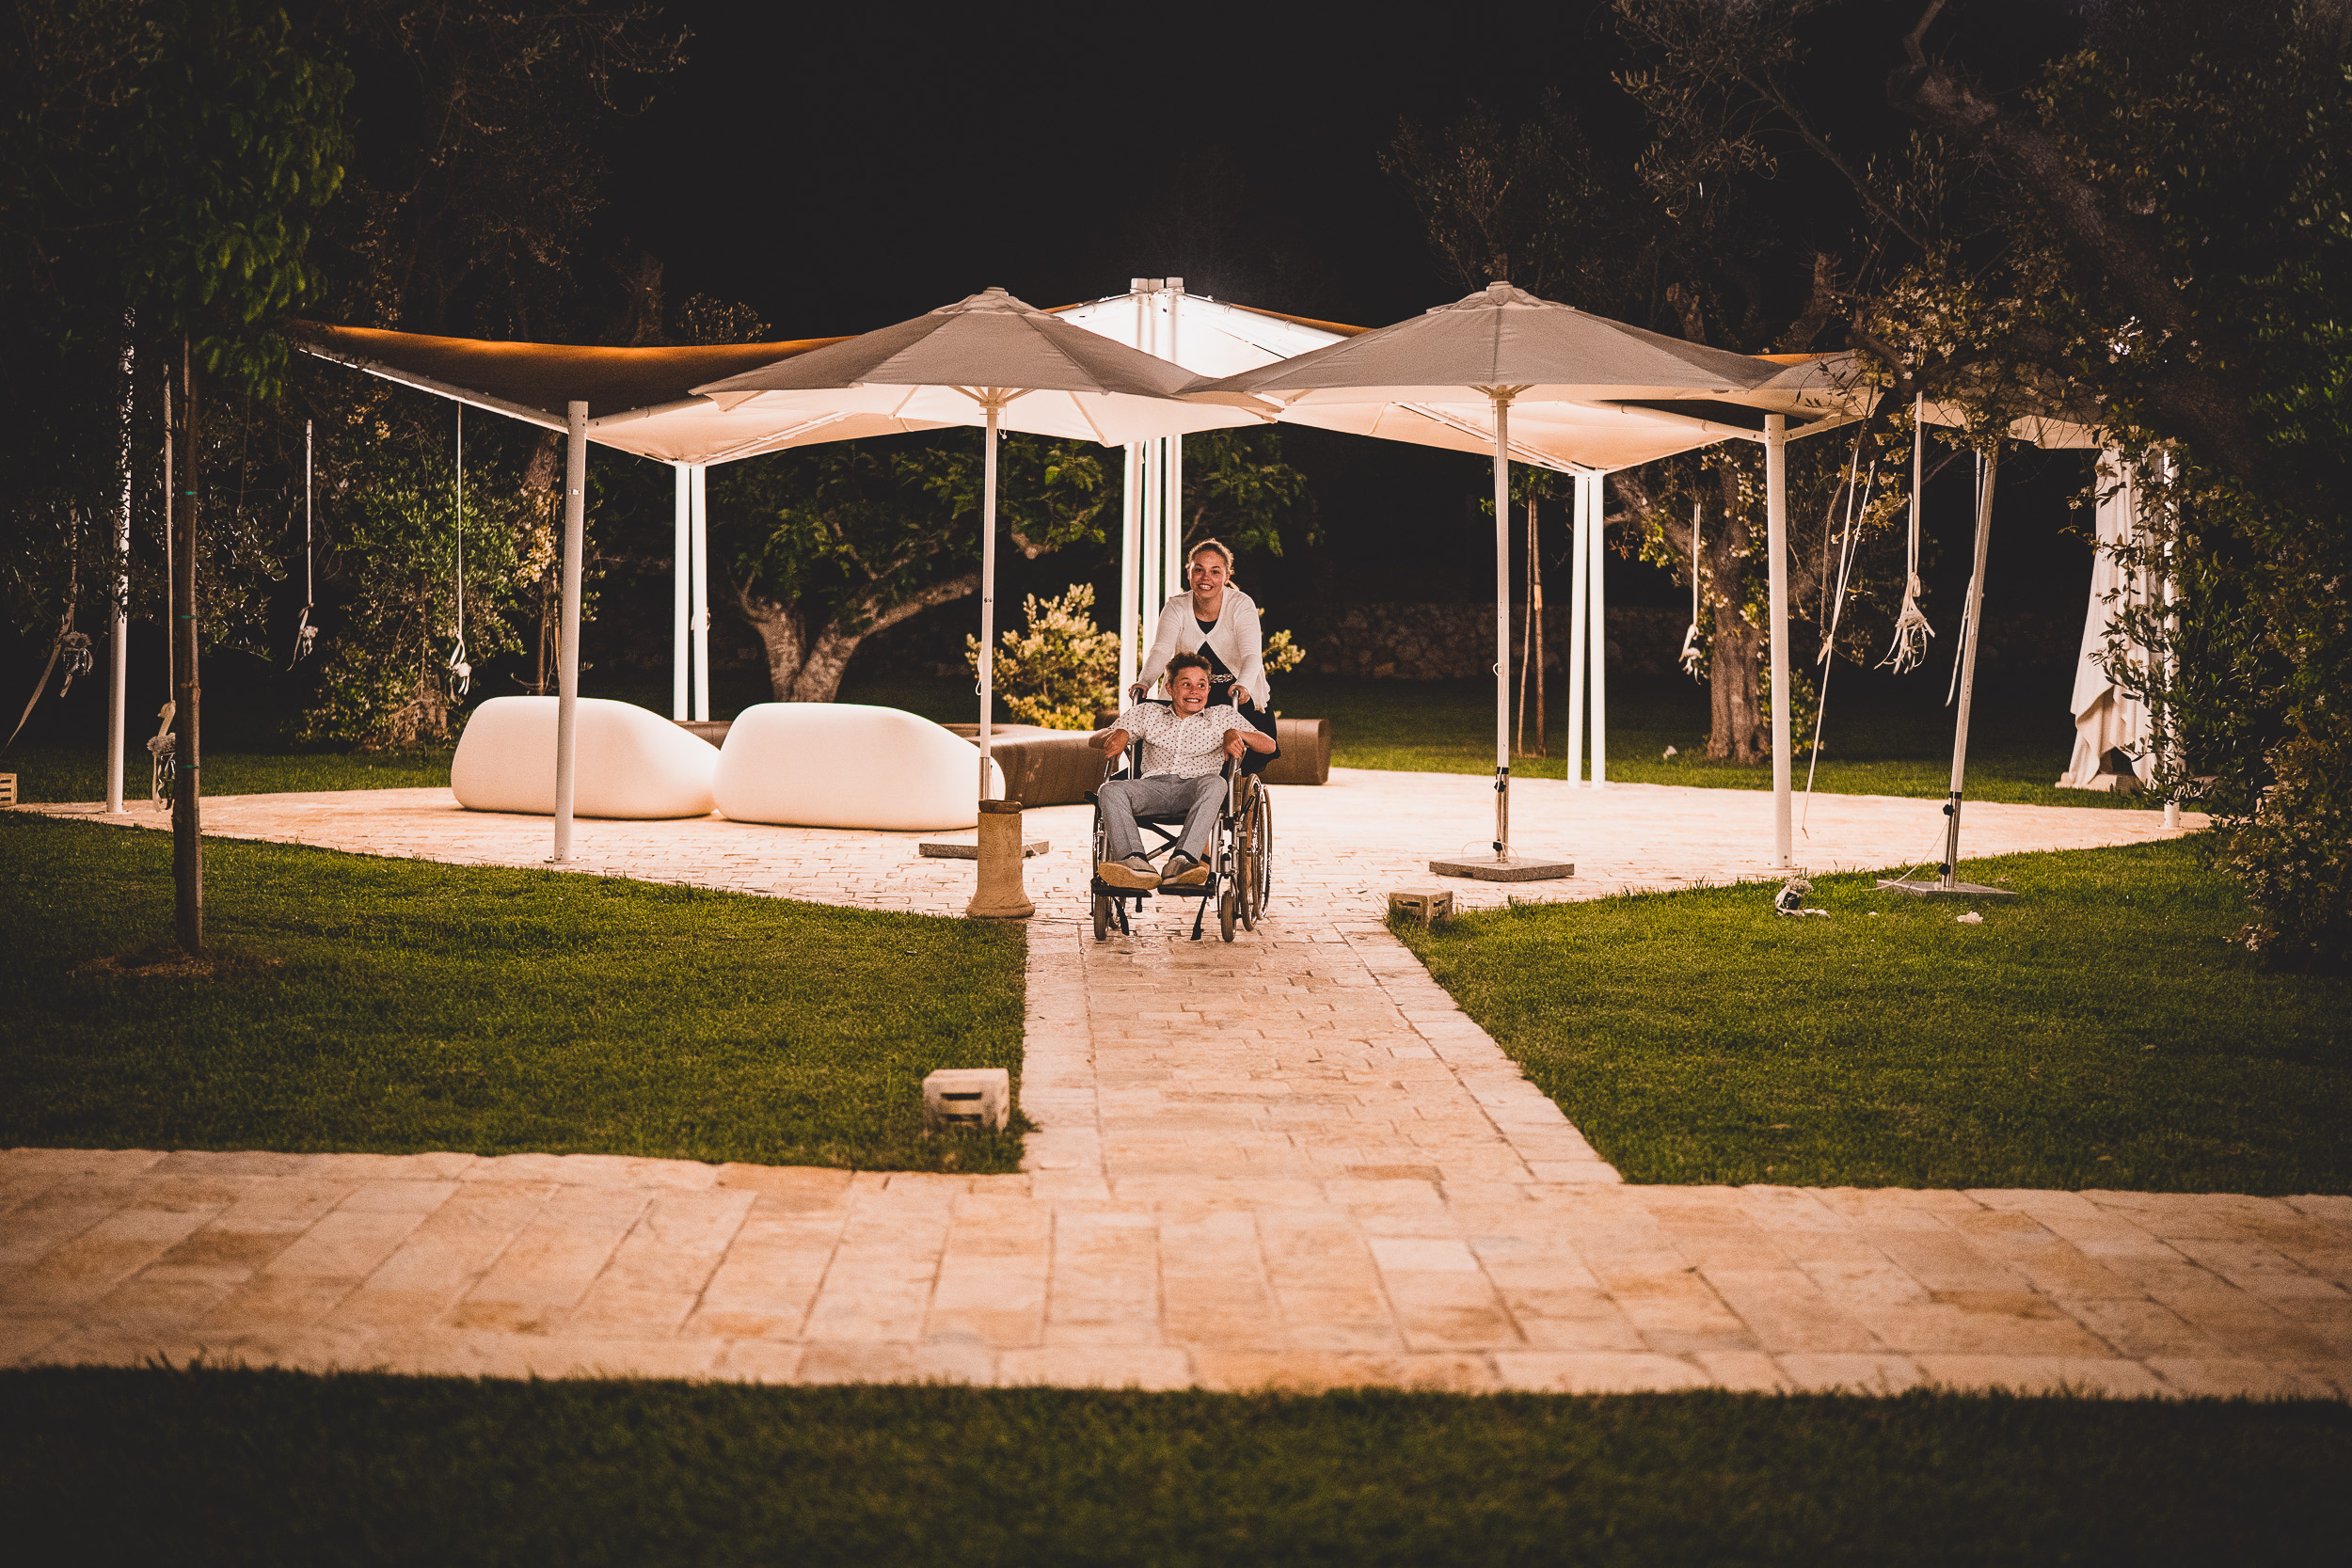 A groom in a wheelchair during a wedding photo session in a garden at night.